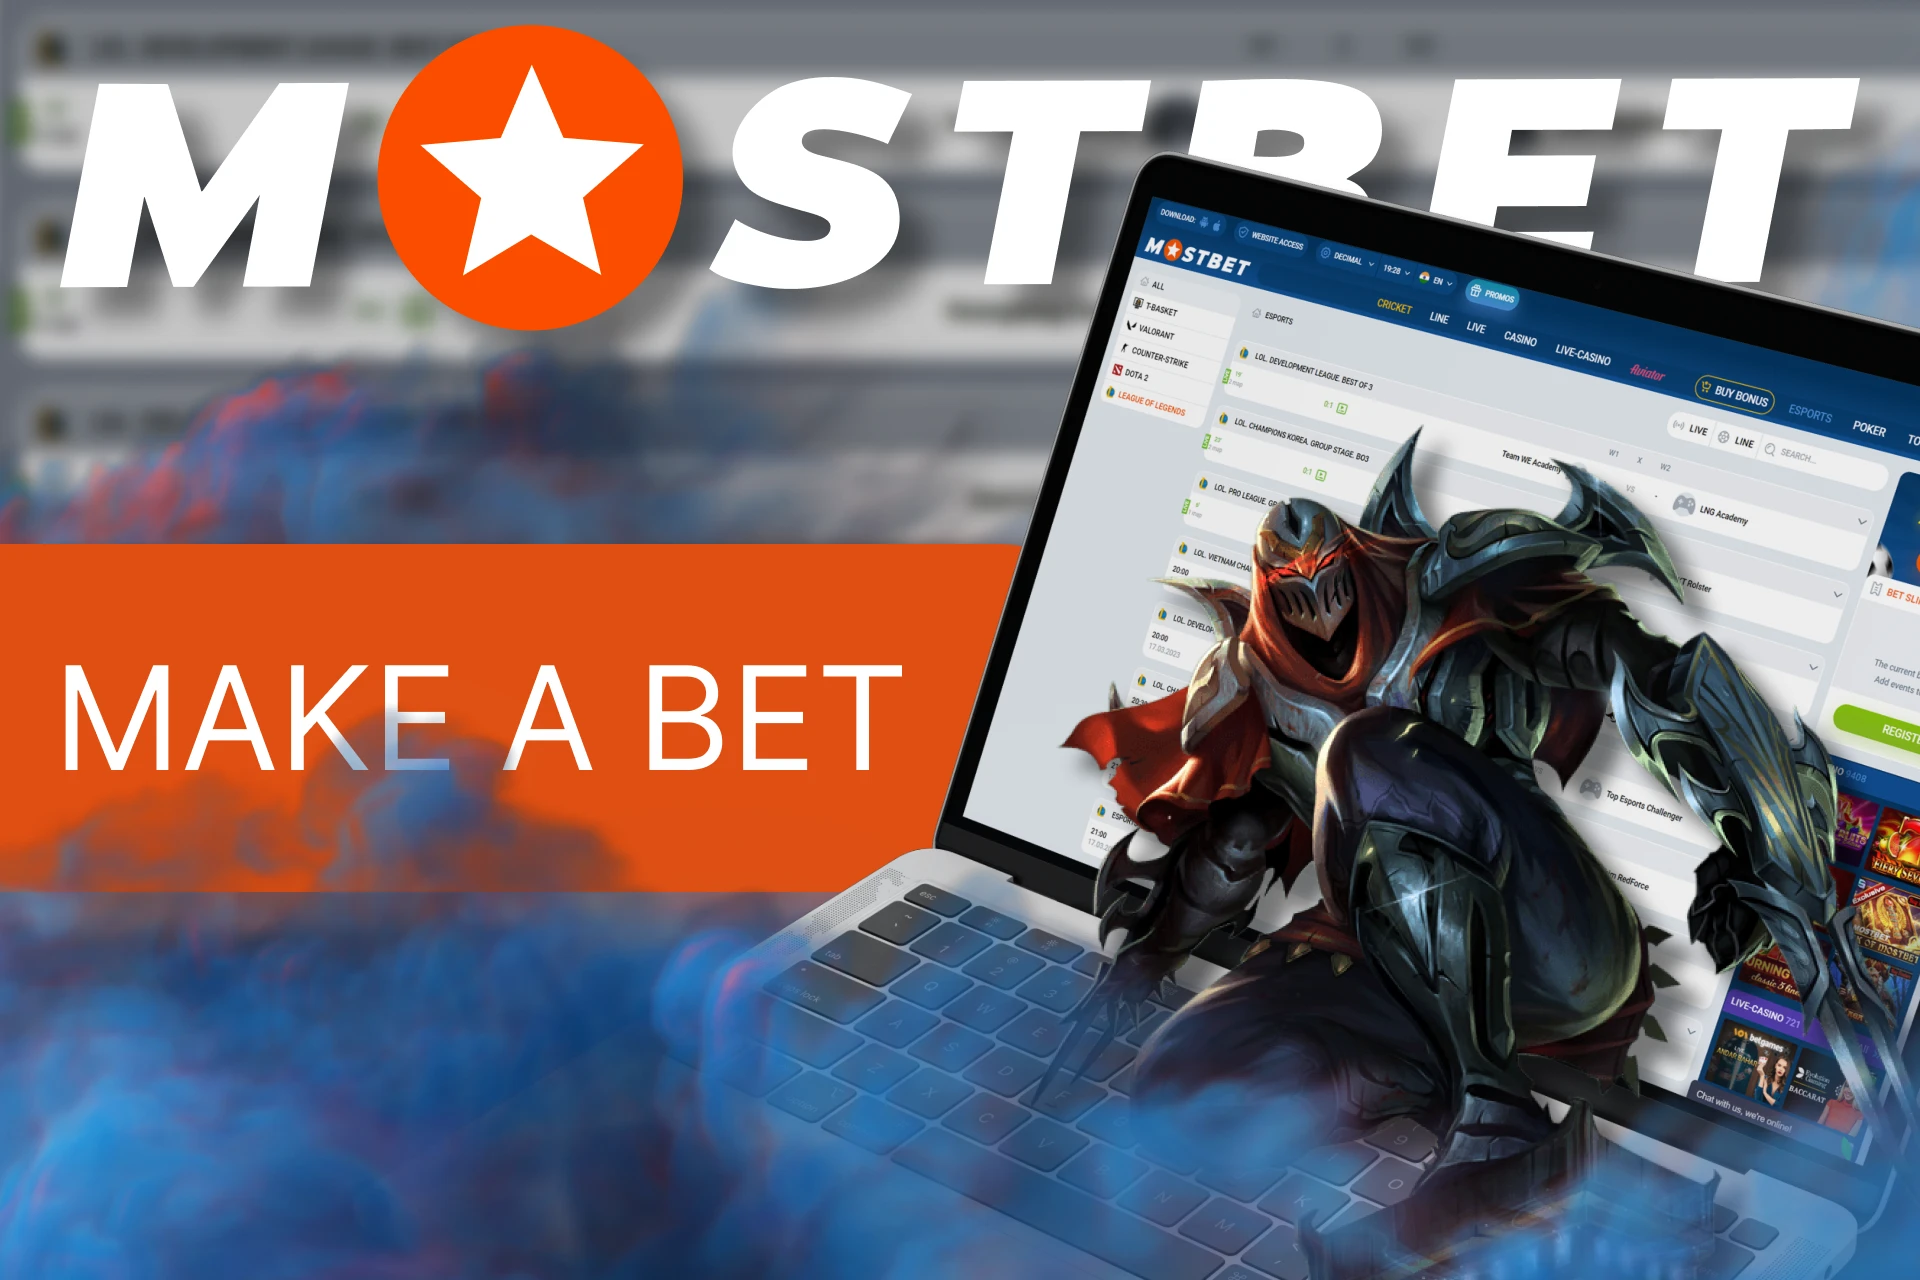 Start betting on the League of Legends at Mostbet.